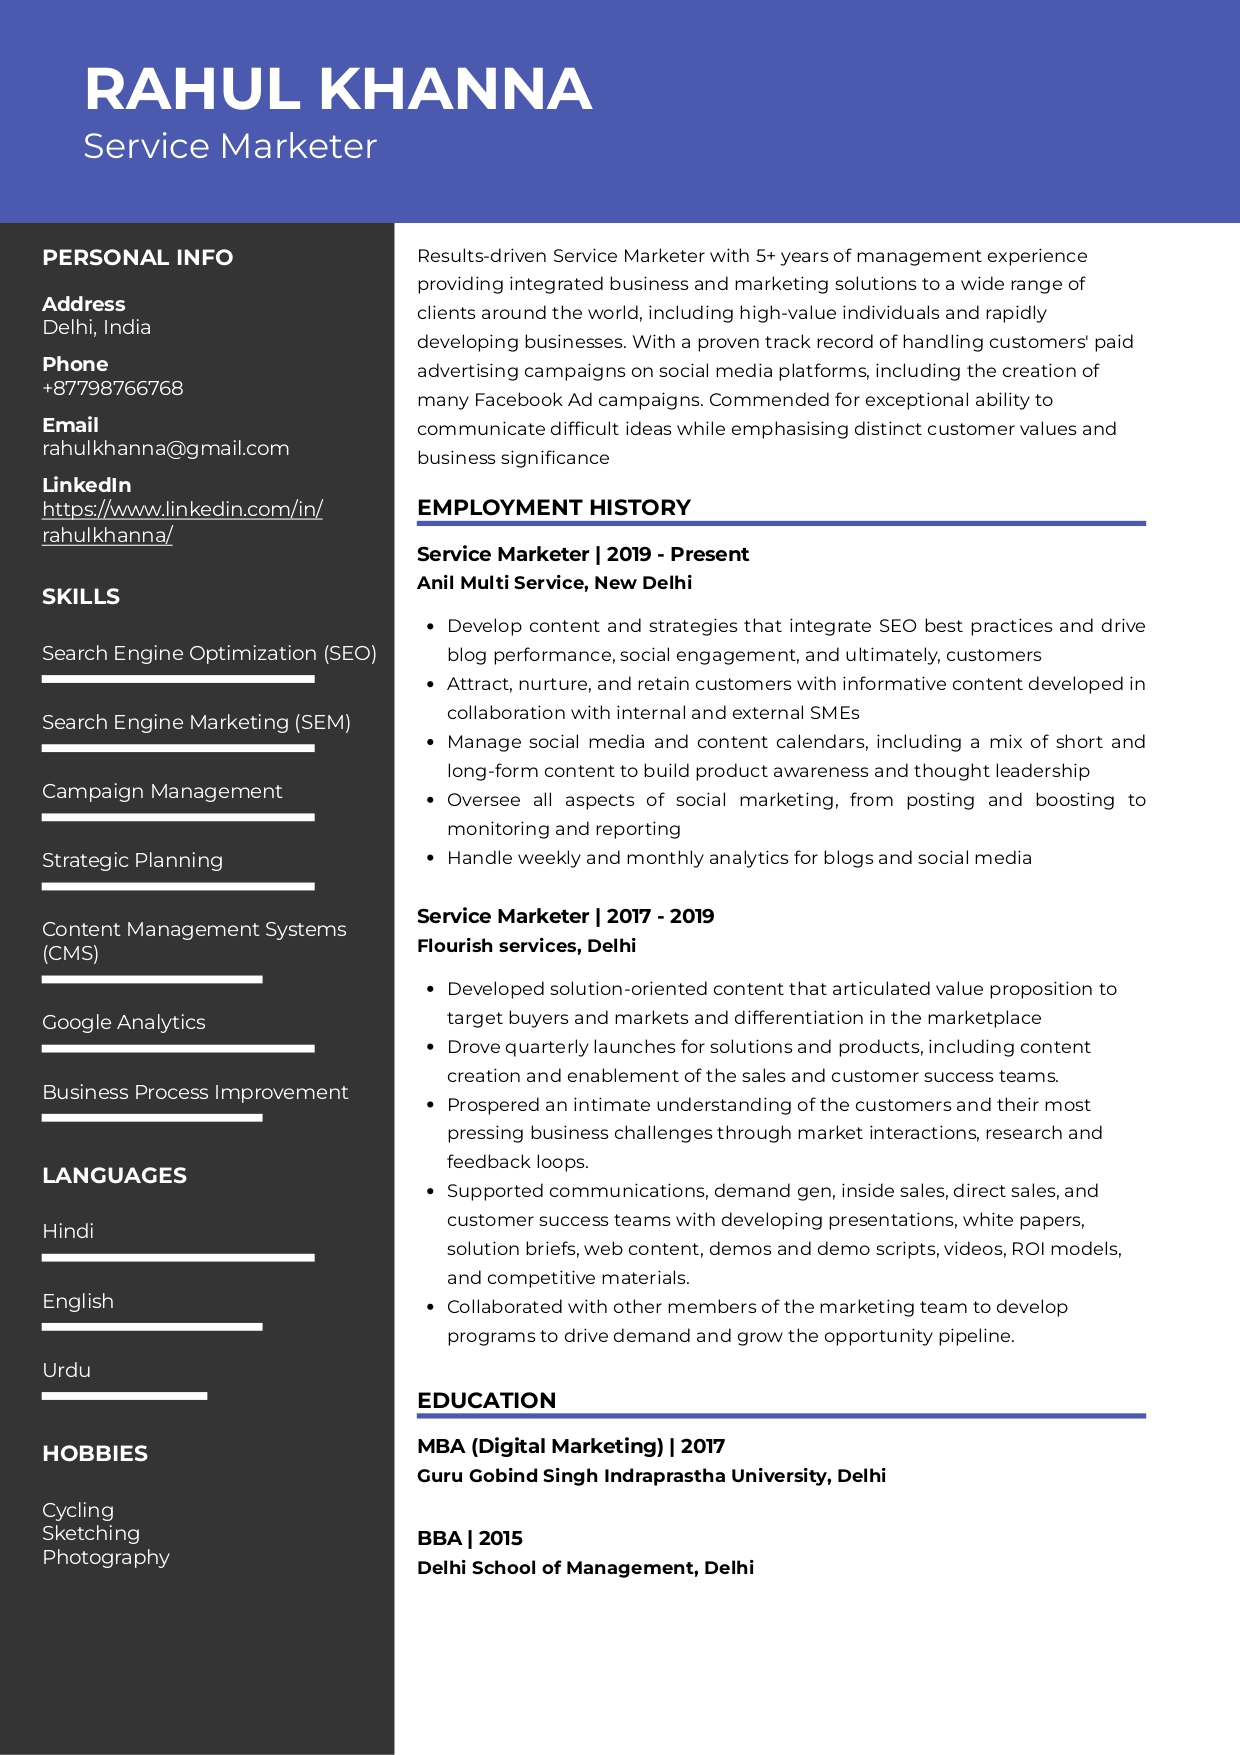 Sample Resume of Service Marketer | Free Resume Templates & Samples on Resumod.co